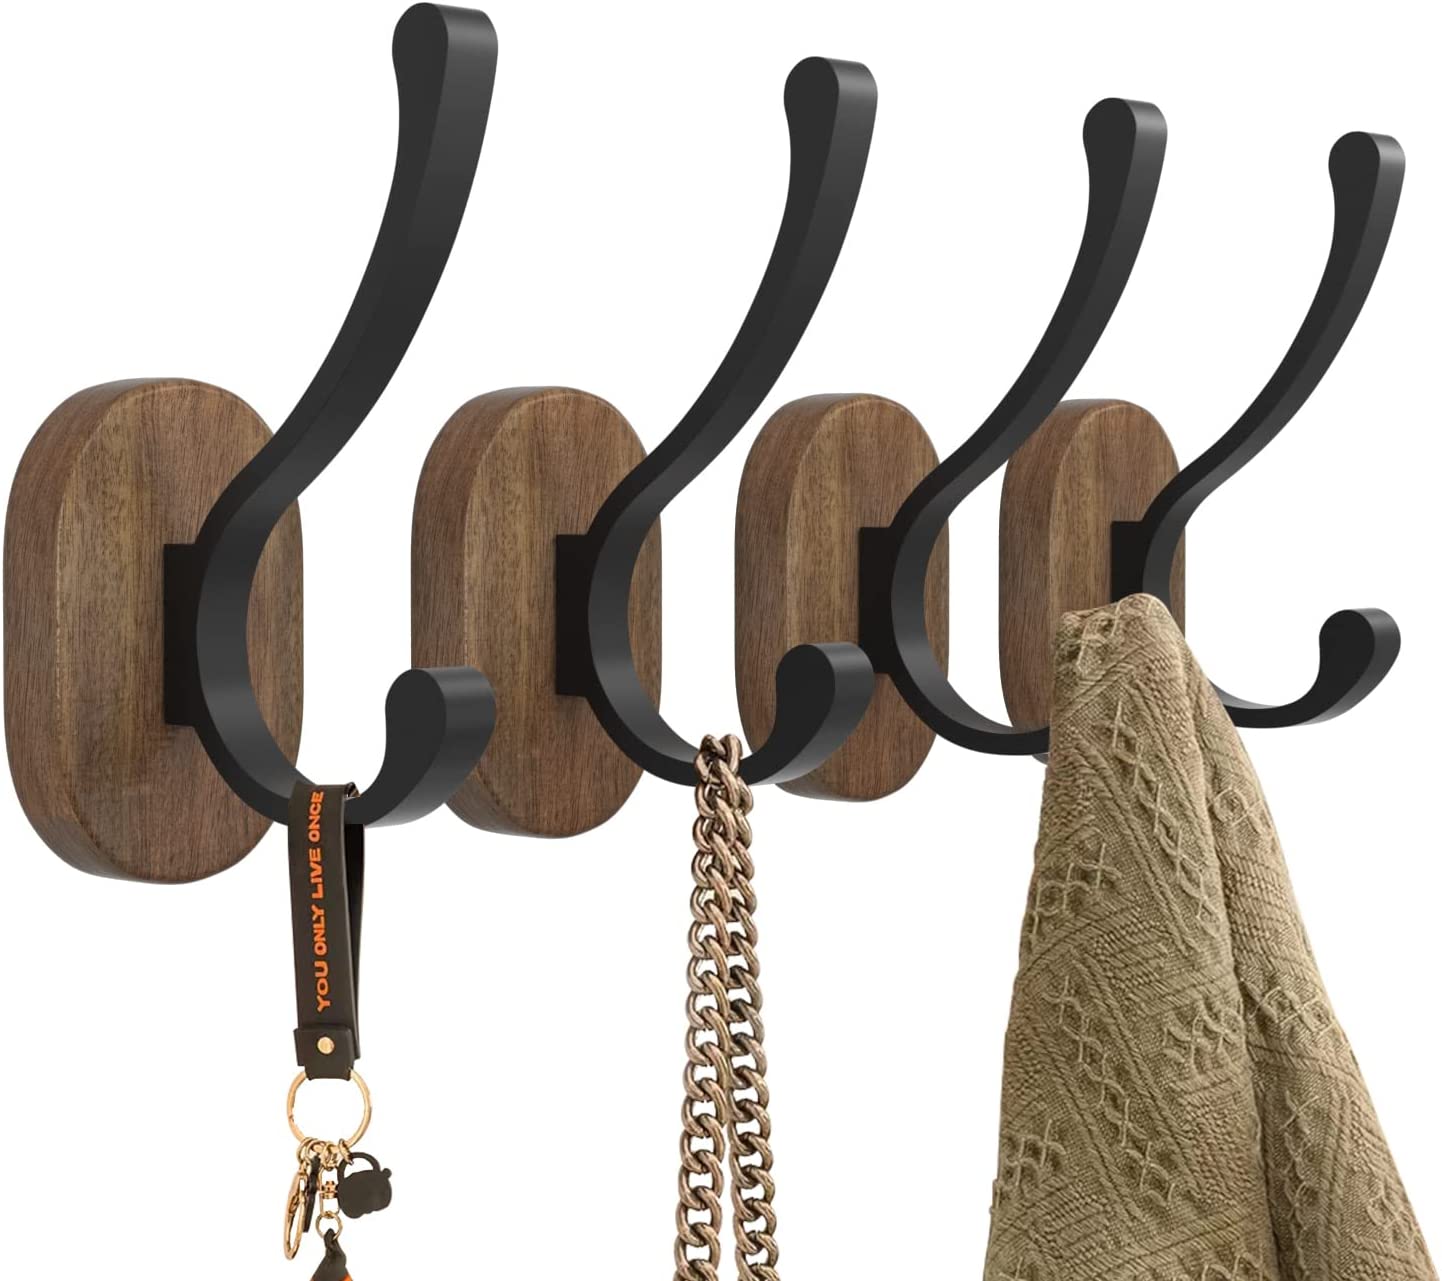 Susswiff Wooden Wall Hangers Decor, 4 Pack Oval Coat Hooks Wall Mounted for Hanging Coats, Towels, Keys, Hats, Robes, Purses, Living Rooms, Bathrooms, Bedrooms, and Cloakrooms 2